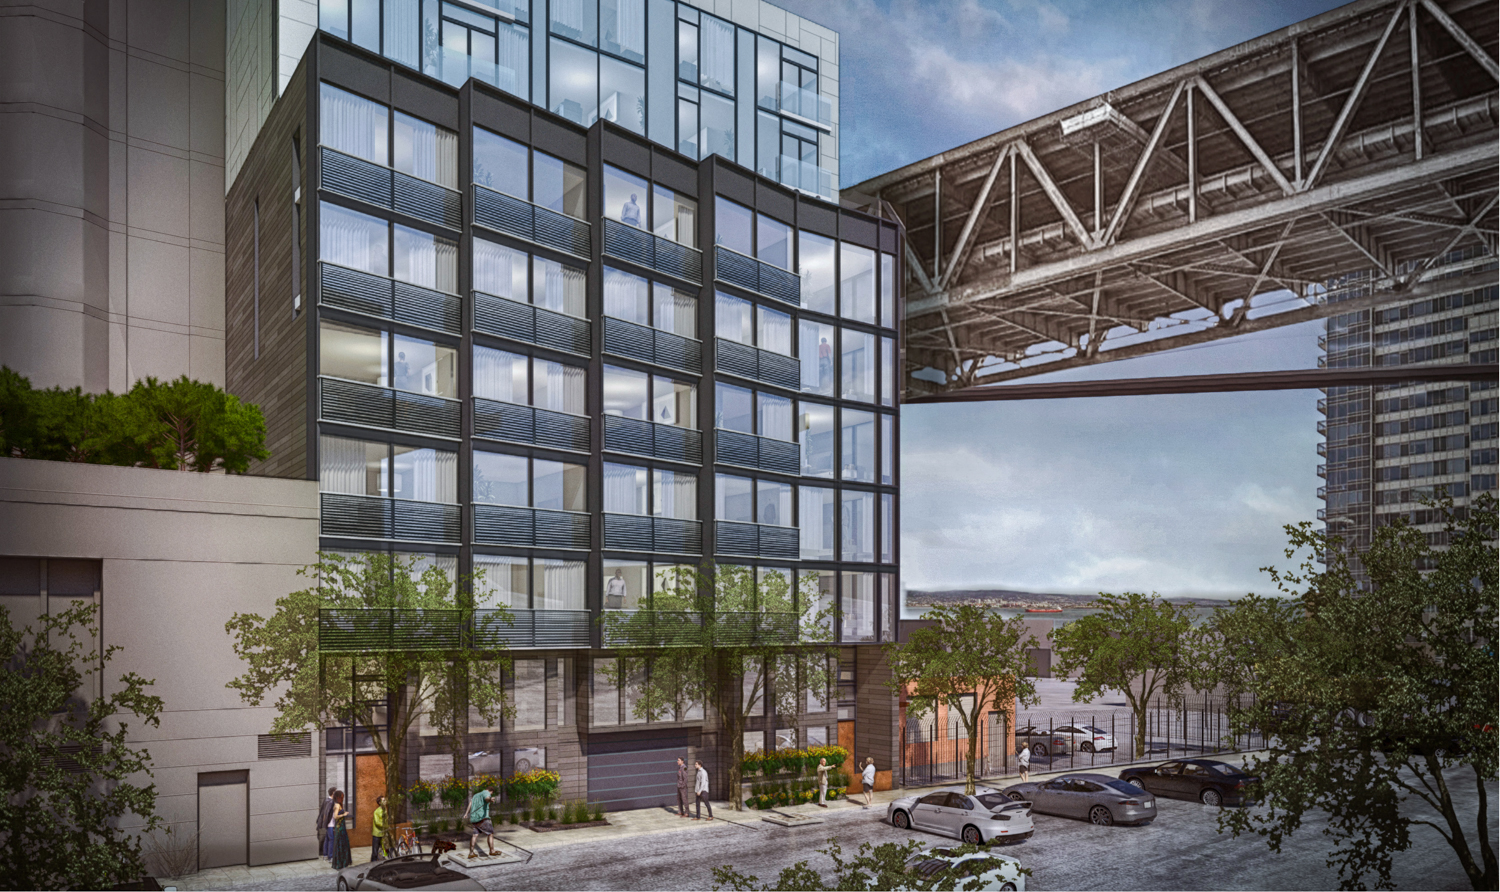 430 Main Street aerial perspective, rendering by Solomon Cordwell Buenz